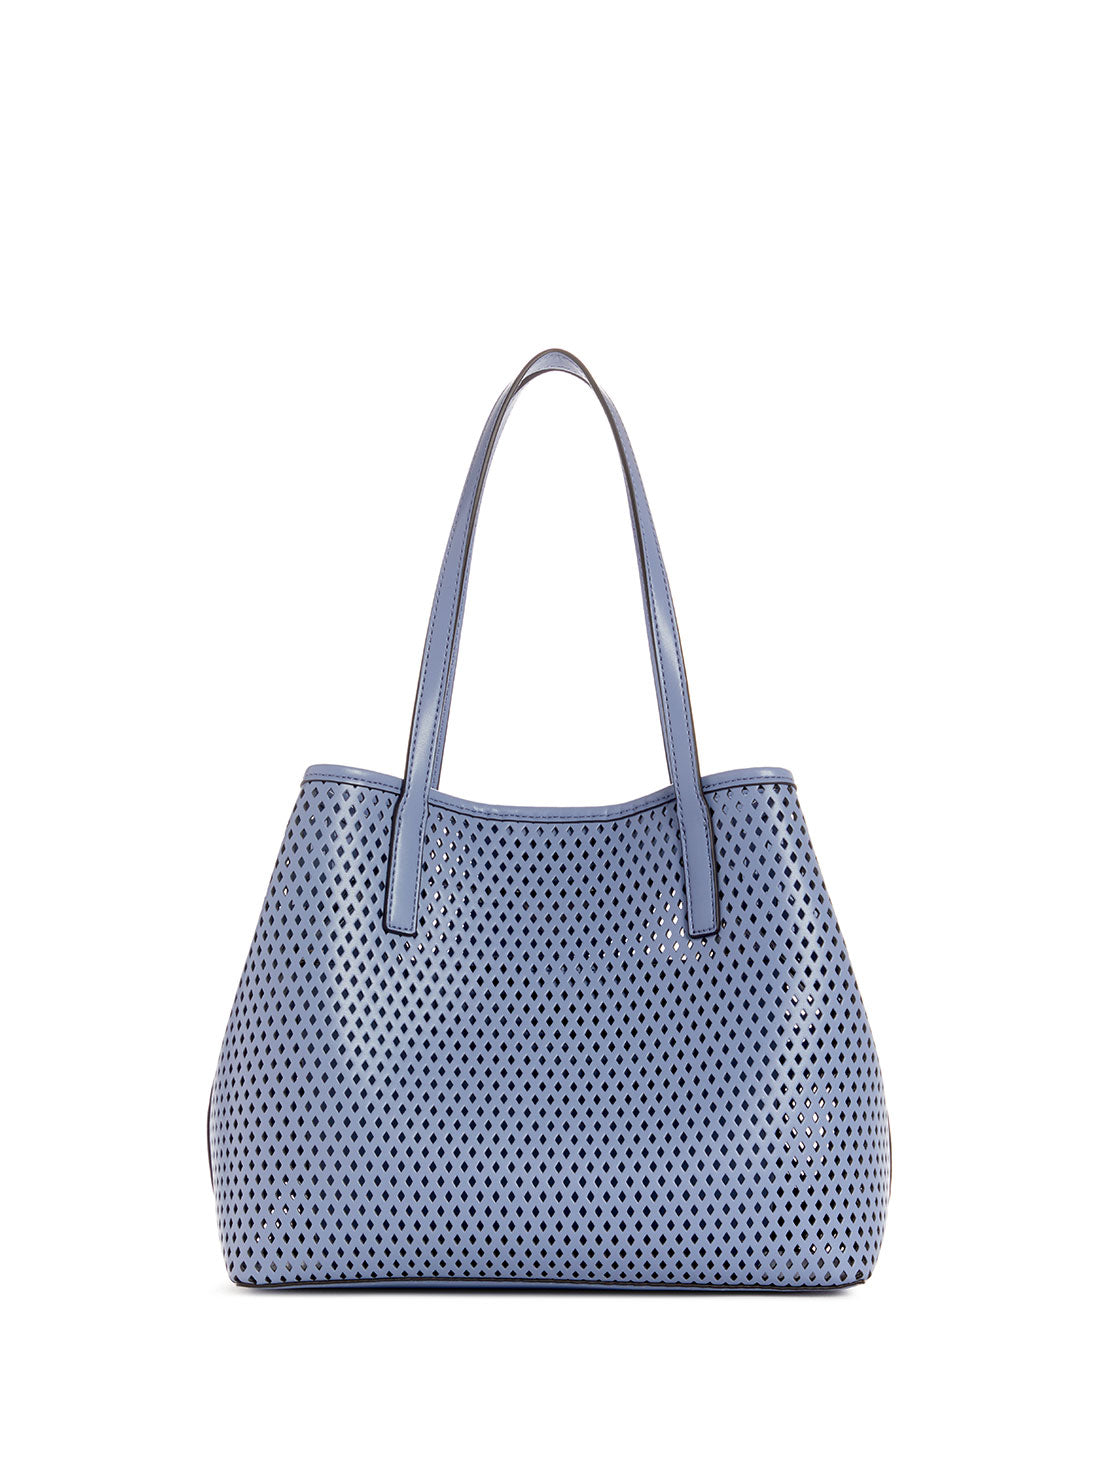 GUESS Women's Wisteria Woven Vikky Tote Bag WP699523 Back View